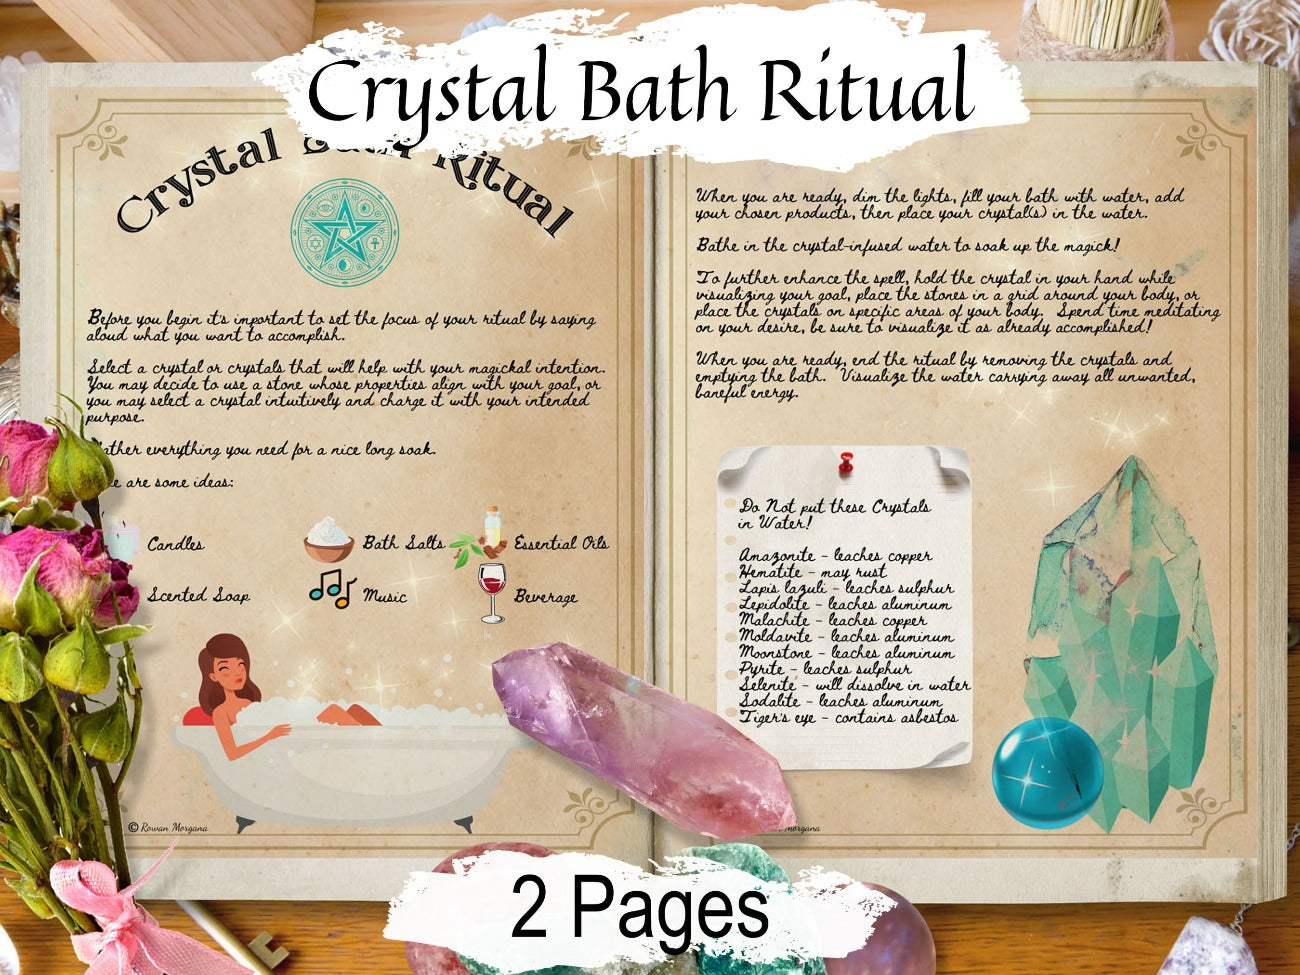 CRYSTAL BATH RITUAL 2 Pages, Crystal Bath Soak, Purification Bath to Cleanse and Clear Negative Energy, crystal and water magic witchcraft - Morgana Magick Spell